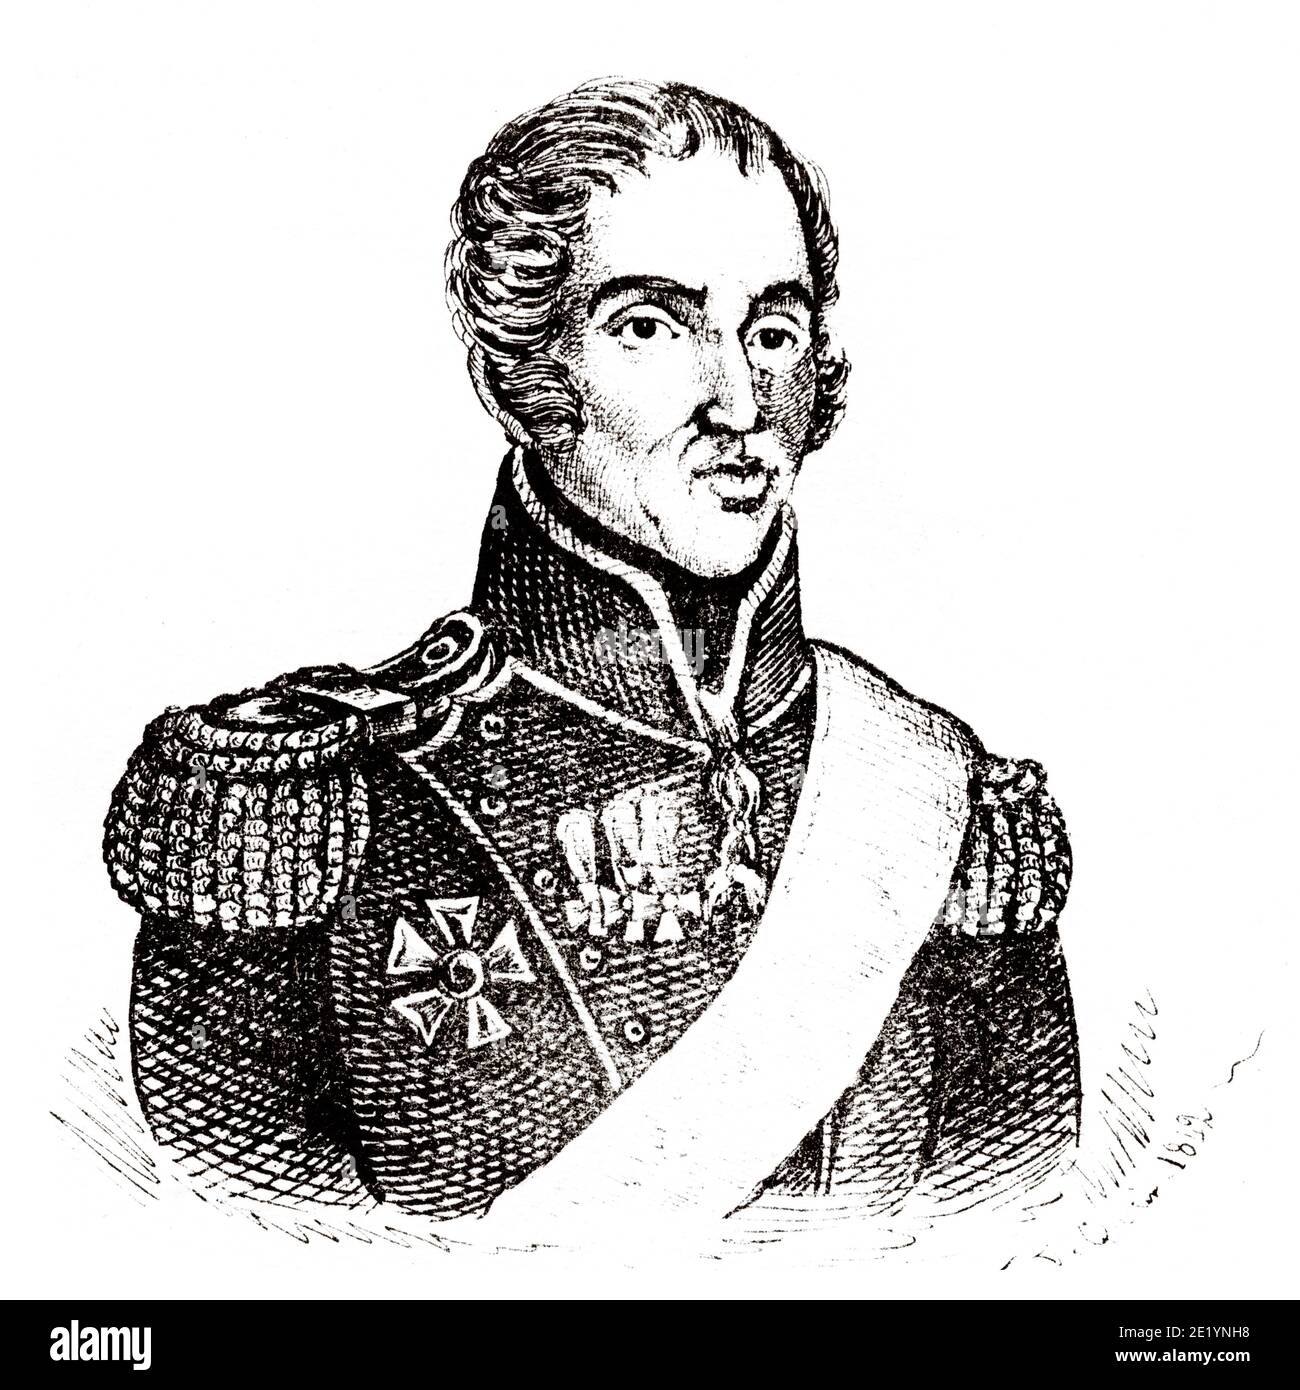 Portrait of Charles X (1757-1836). King of France from 1824 to 1836. House of Bourbon. History of France, from the book Atlas de la France 1842 Stock Photo